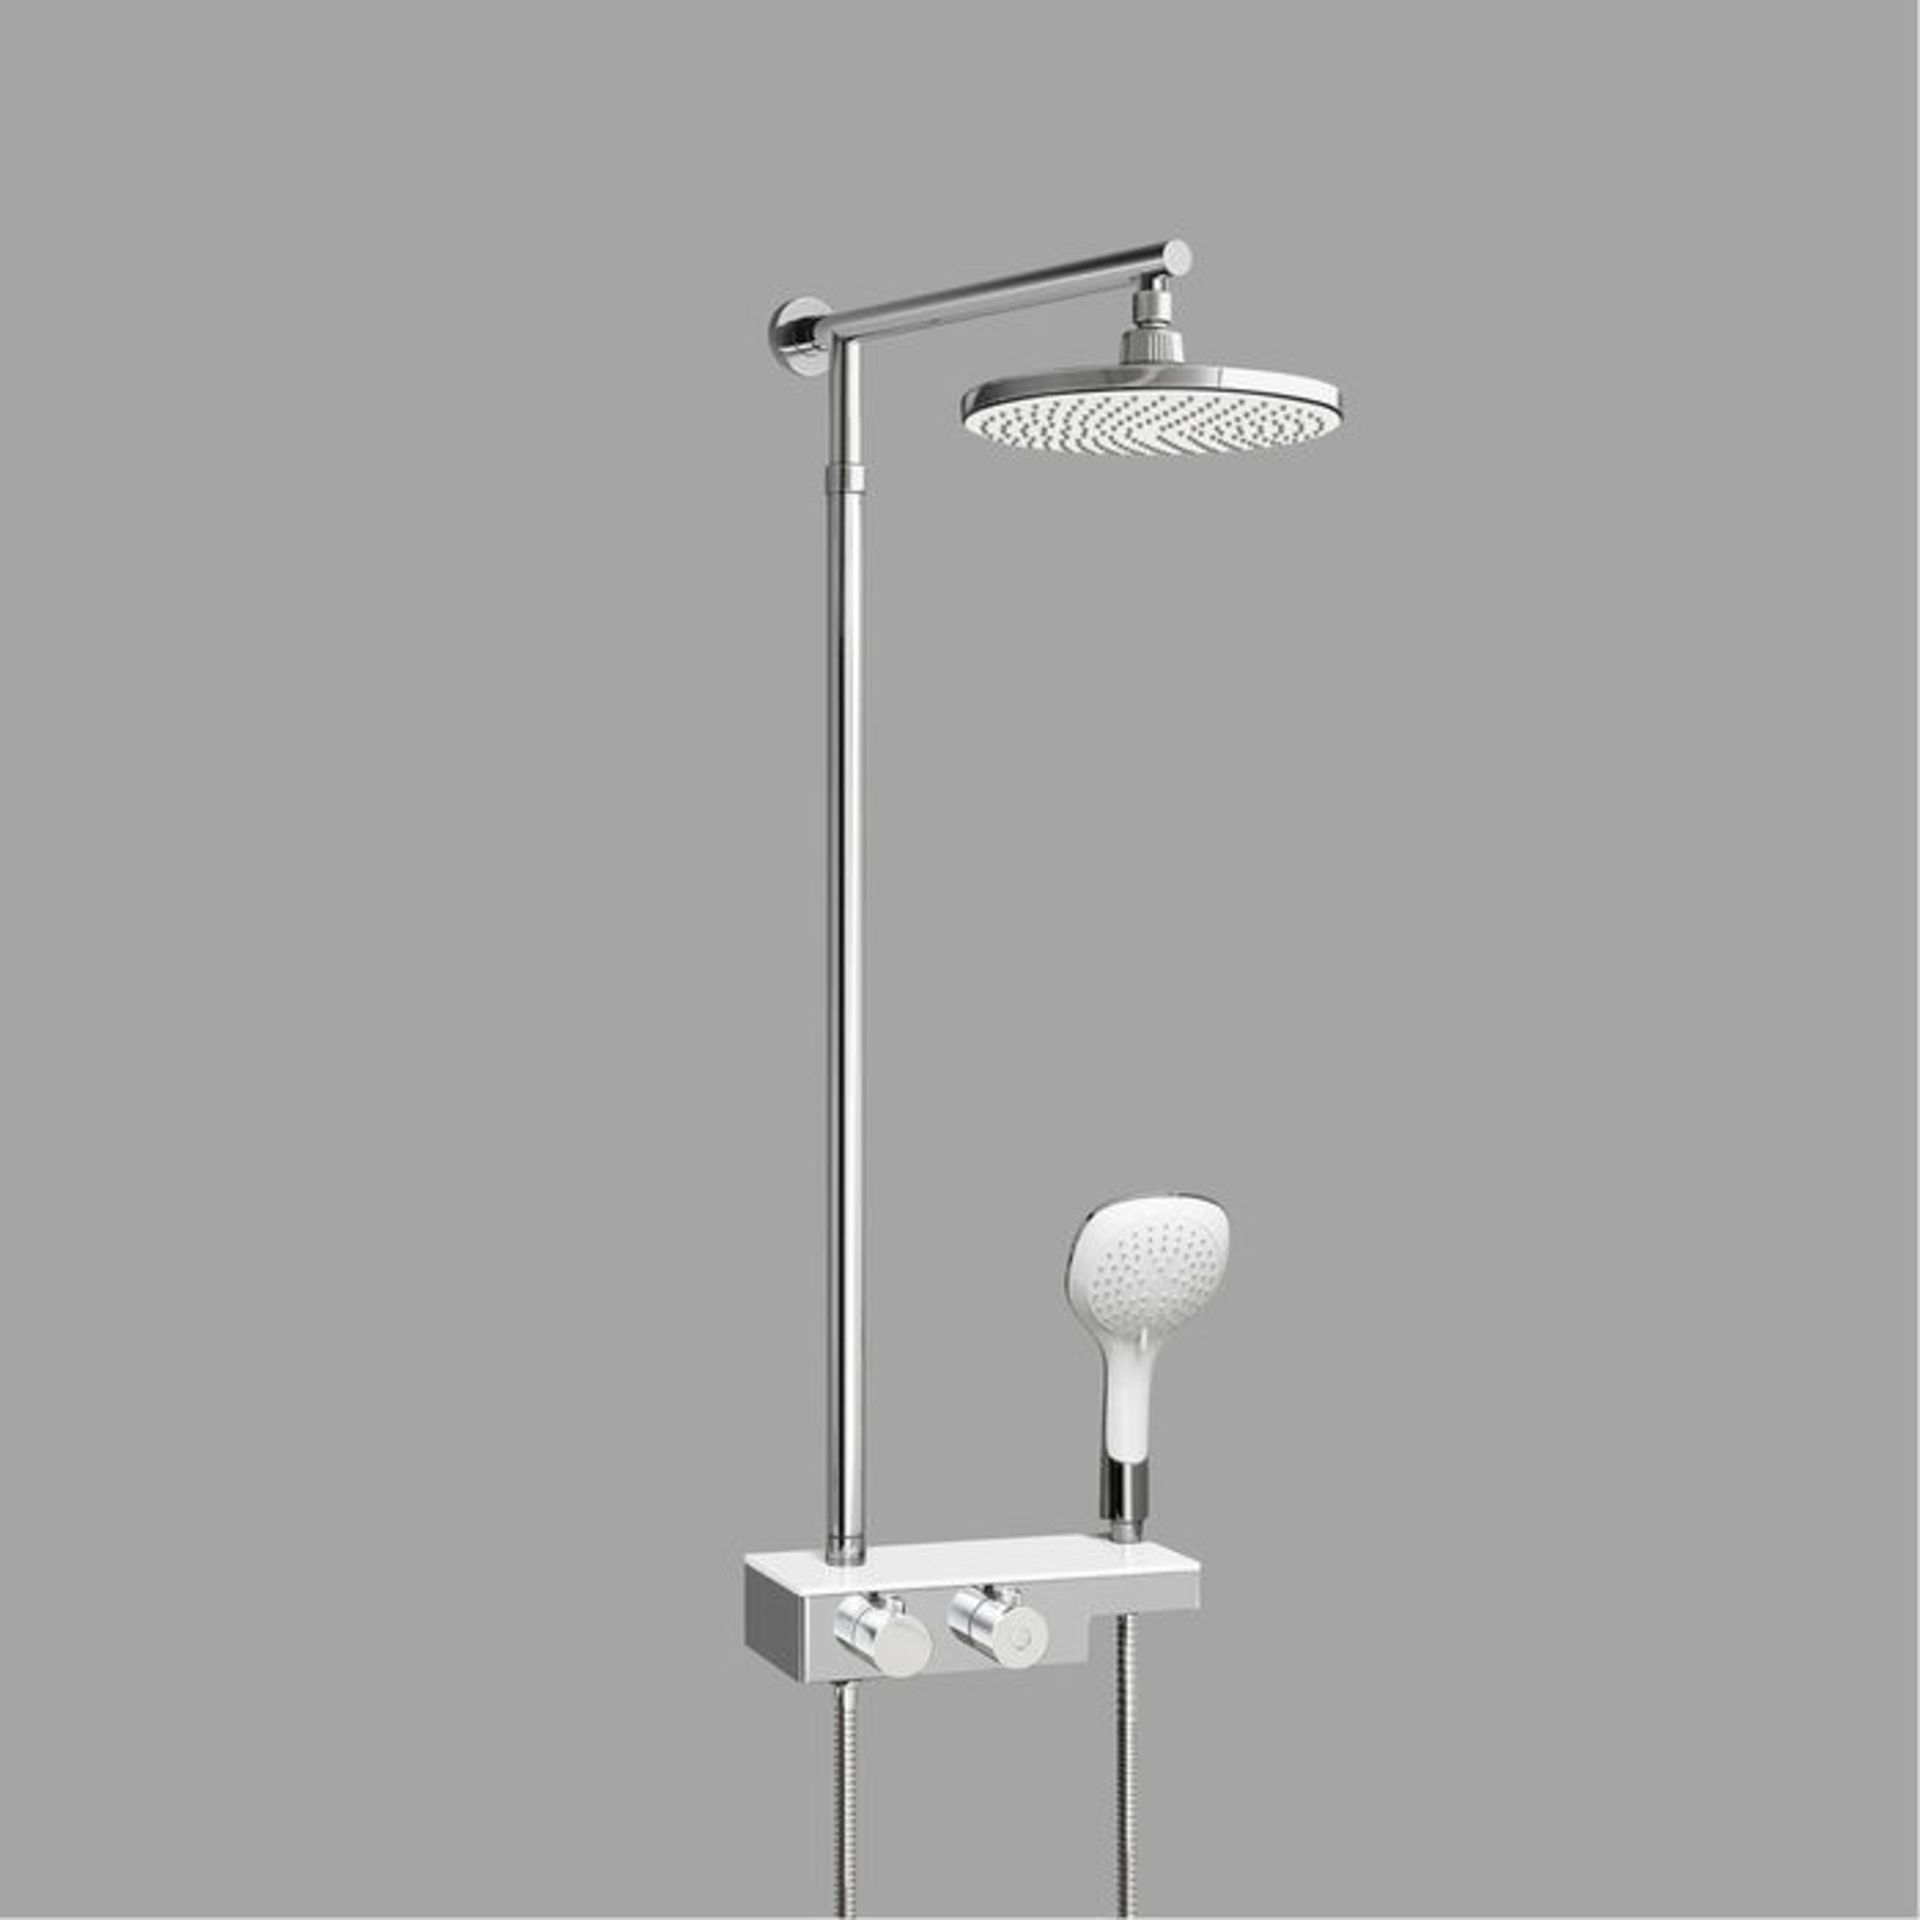 (S42)Round Exposed Thermostatic Mixer Shower Kit Medium Head & Shelf. Cool to touch shower for - Bild 5 aus 5